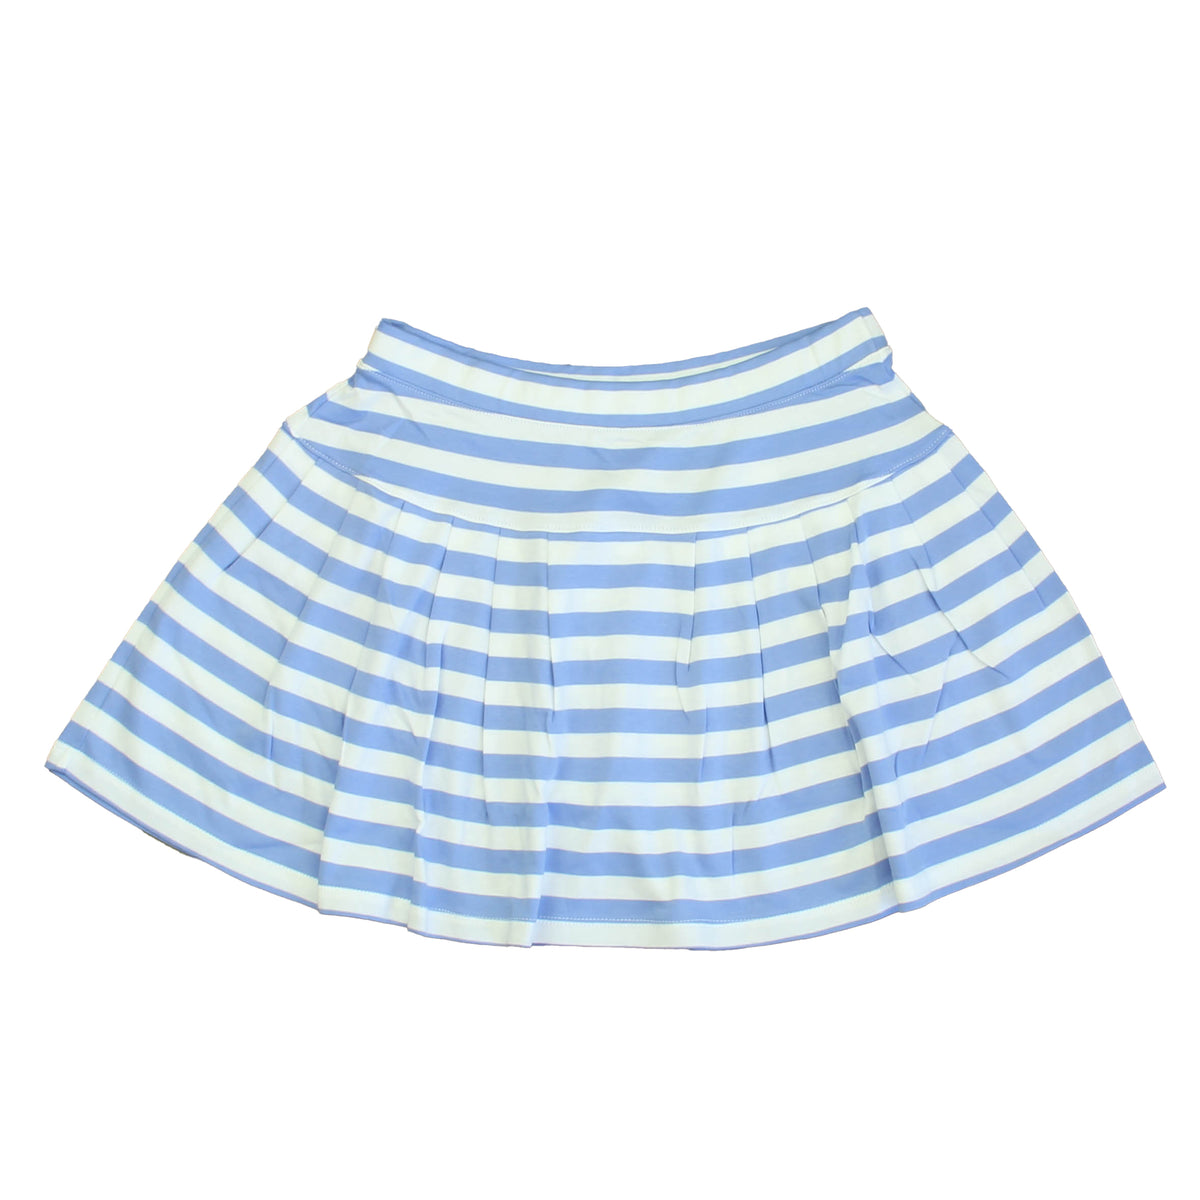 New with Tags: Cornflower Blue Stripe Skirt size: 12 Years -- FINAL SALE